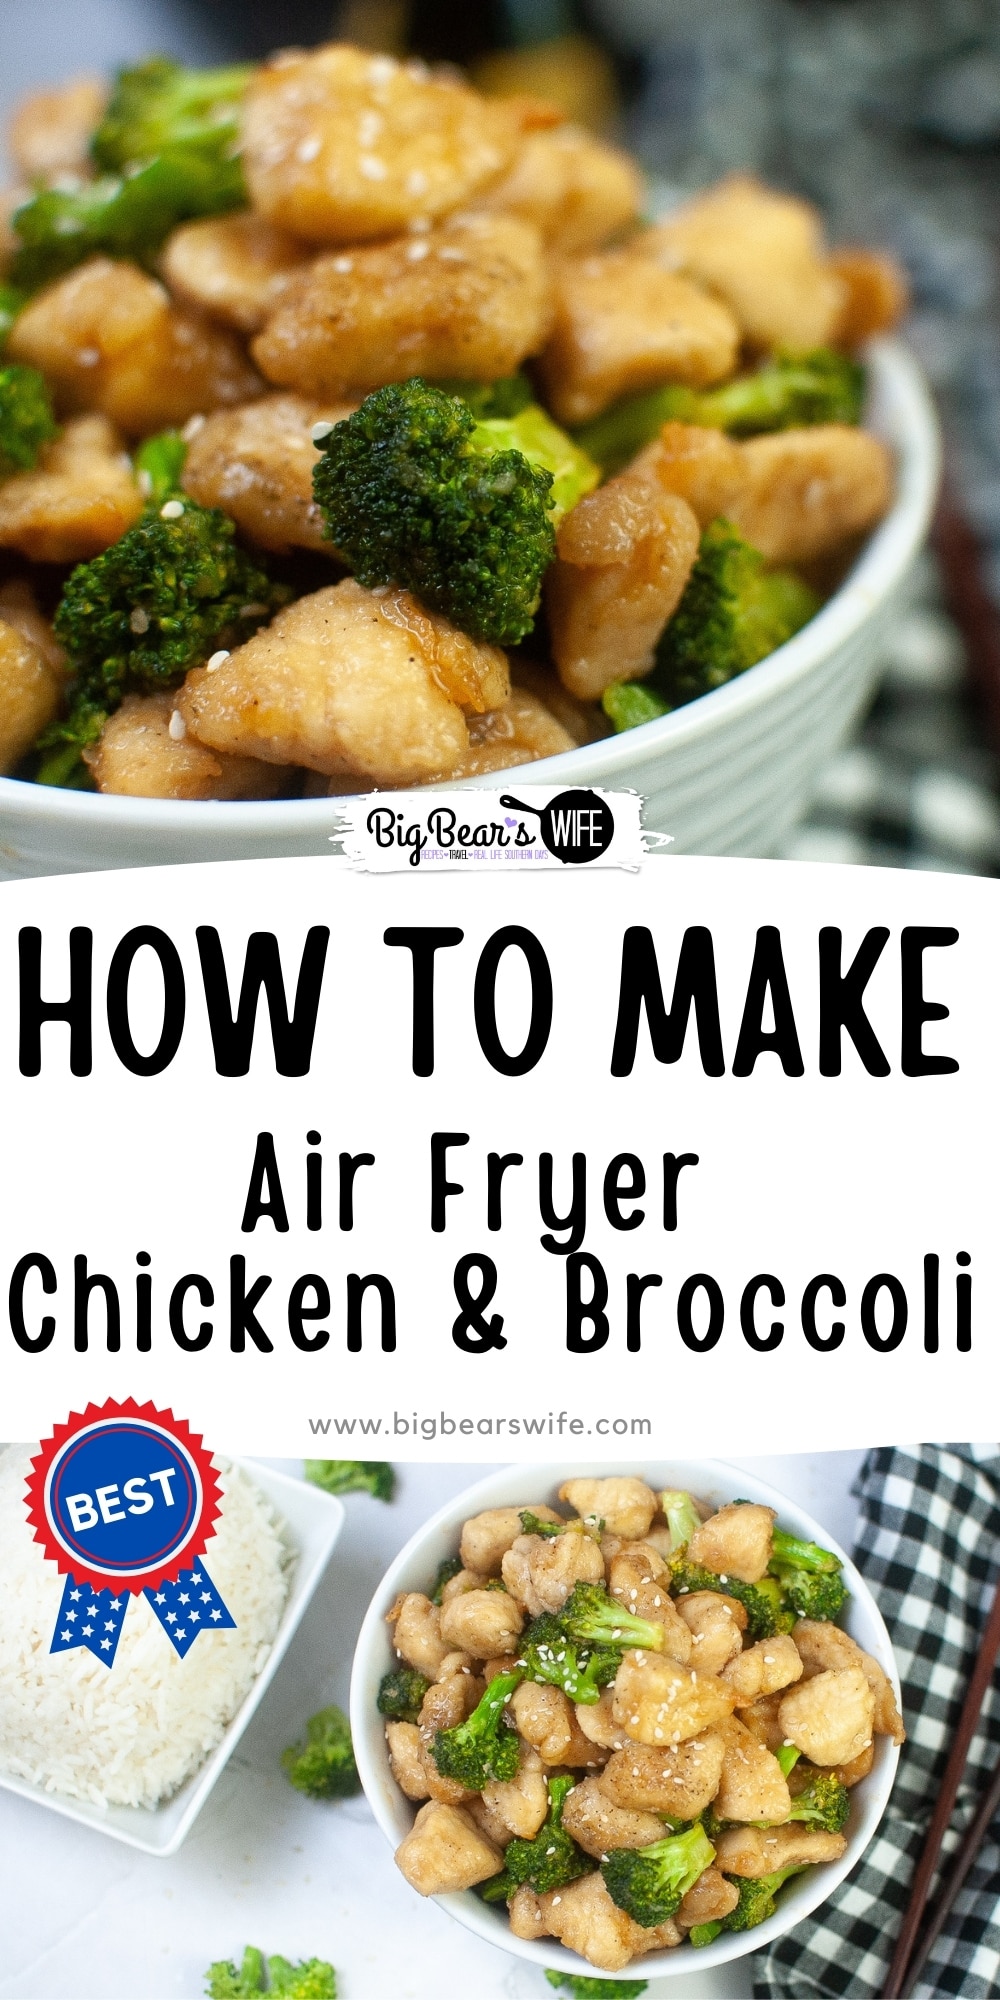 This fantastic Air Fryer Chicken and Broccoli is a take out inspired recipe that is great for any day of the week! Chicken is cooked in the air fryer and them mixed together with an easy sauce and fresh broccoli for the perfect "takeout" at home. Great on it's own or served over rice.

 via @bigbearswife